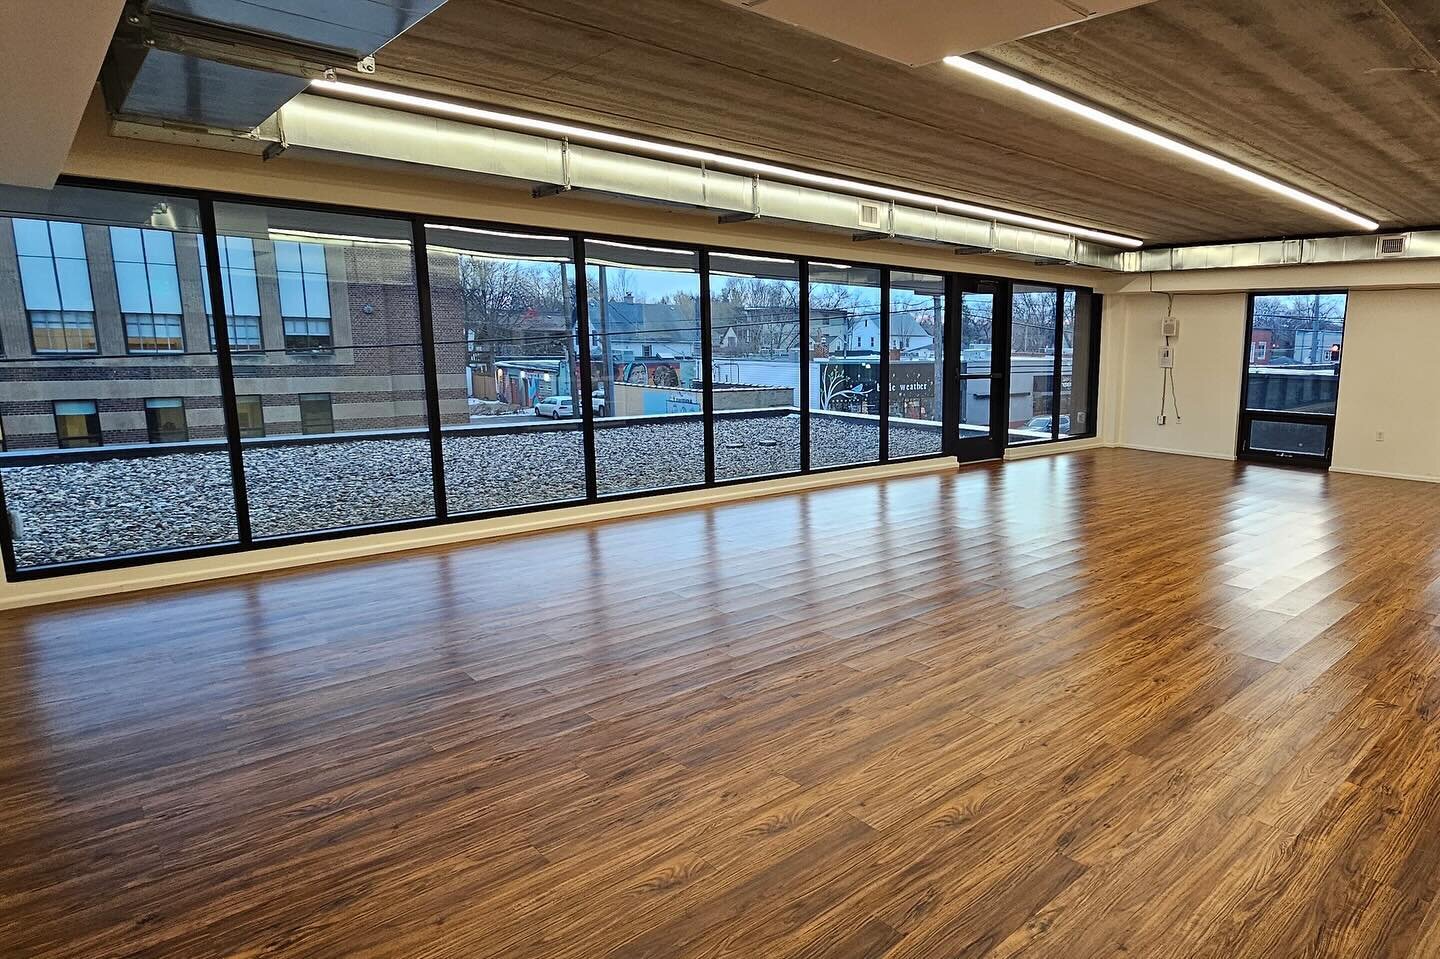 The room where it happens 🎤 ✨ Join us at @cfpampls for weekly group voice classes starting in February! Your first class is free. Link in bio.